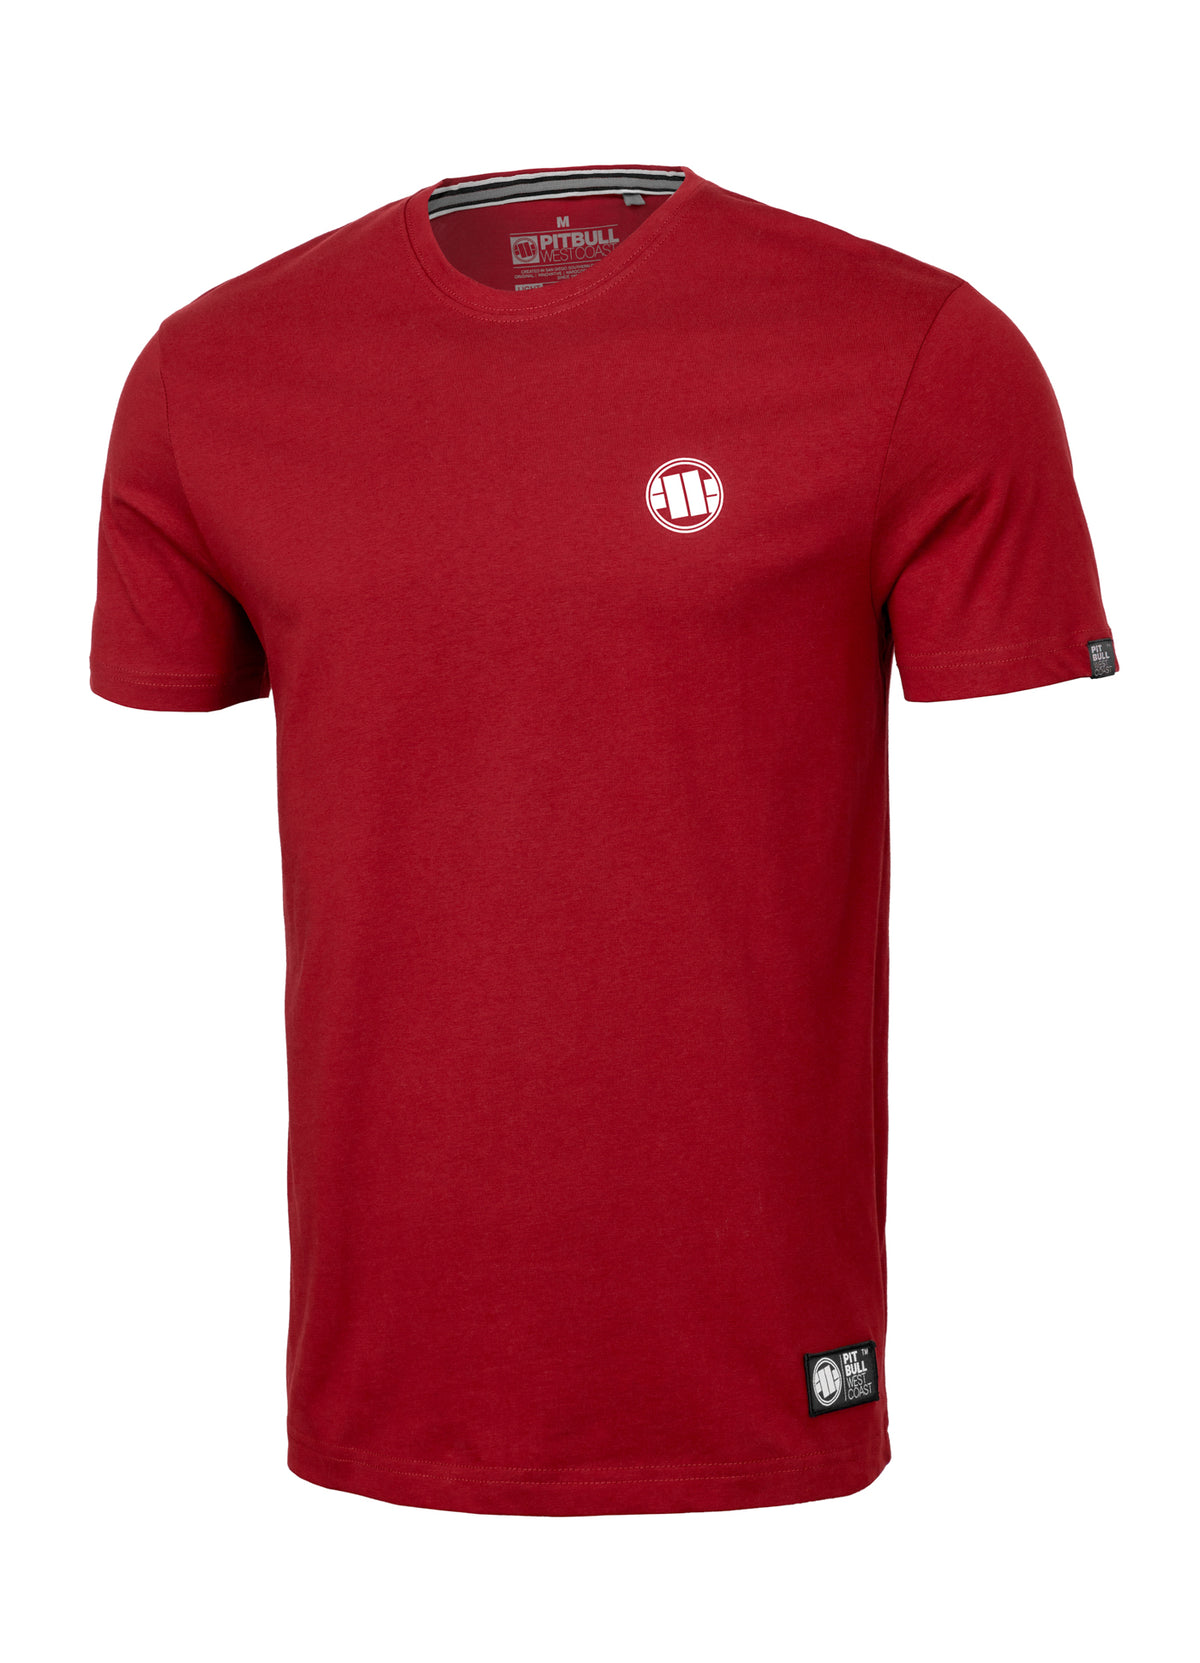 SMALL LOGO 21 Red T-Shirt.